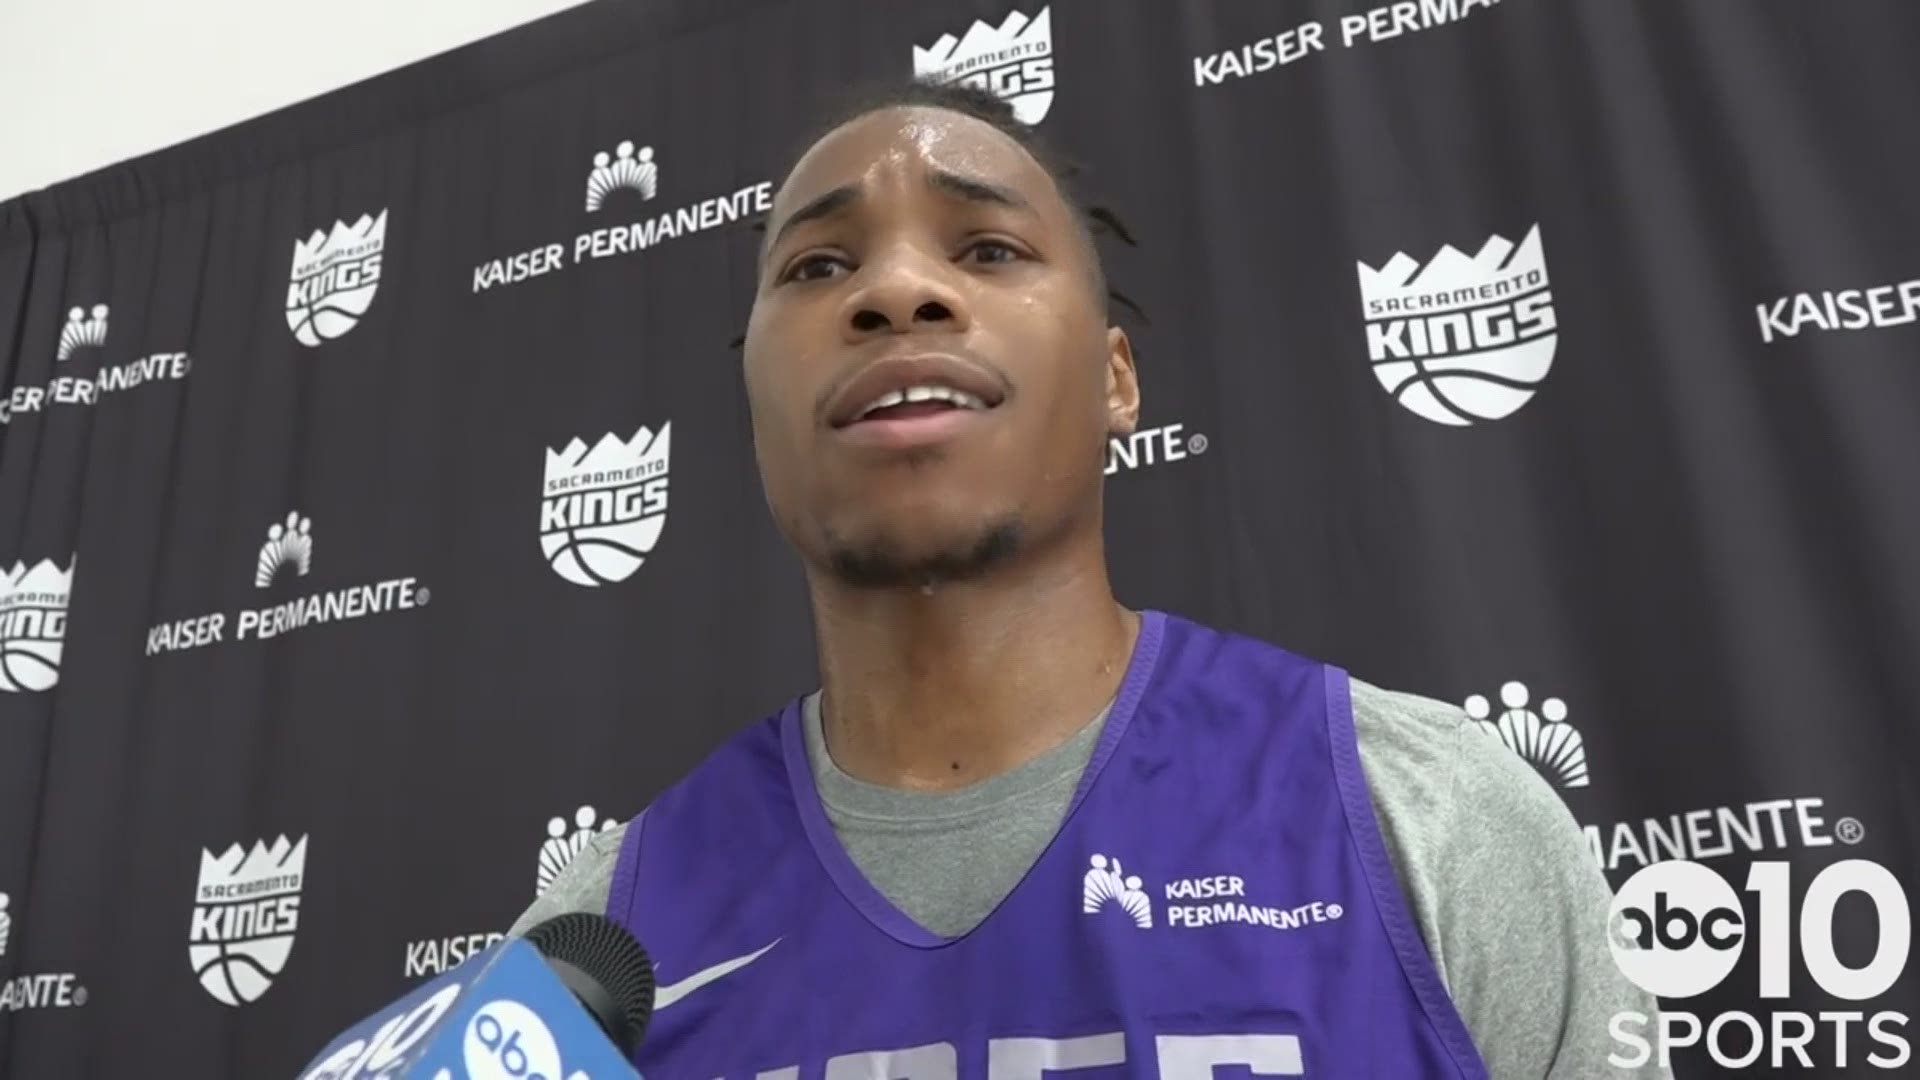 Sacrmaento Kings F Richaun Holmes on the bitter loss to the Lakers last night in Los Angeles and looks ahead to hosting the Boston Celtics on Sunday.